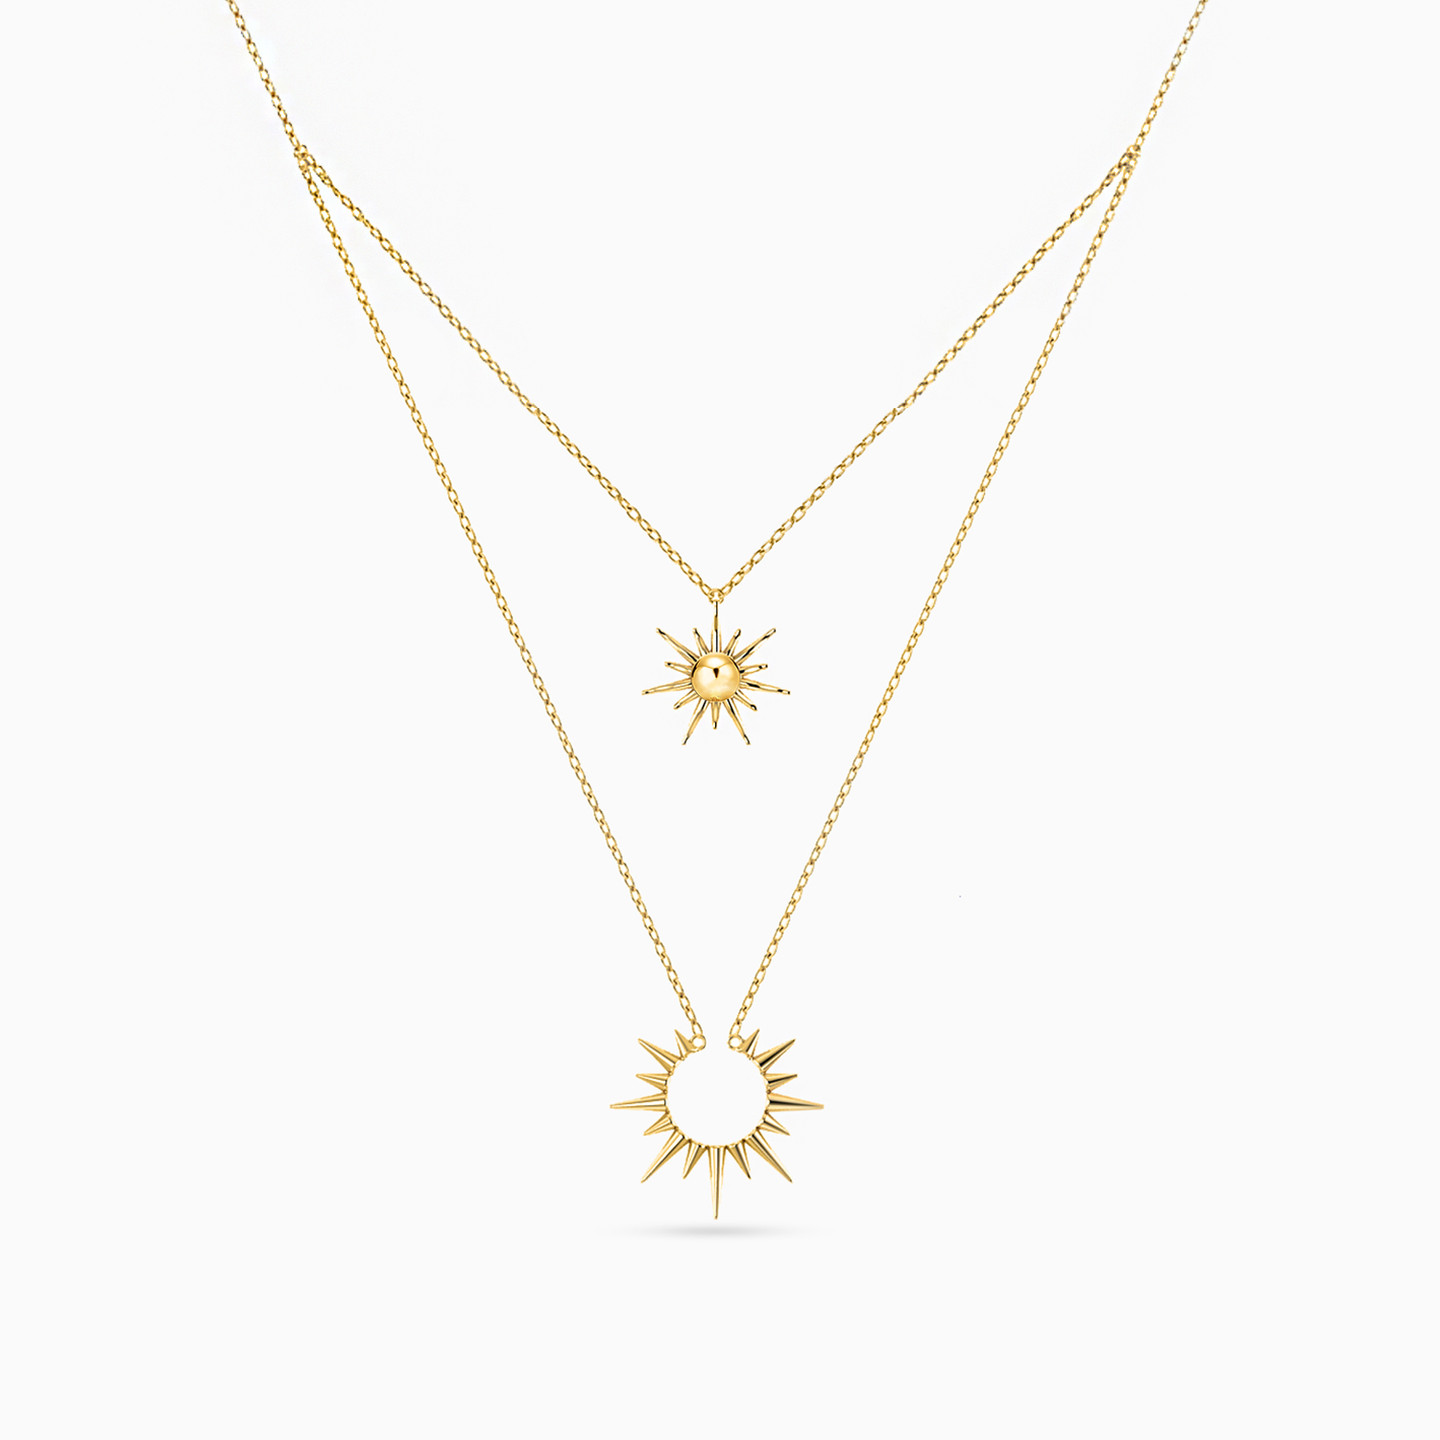 18K Gold Layered Necklace - 2